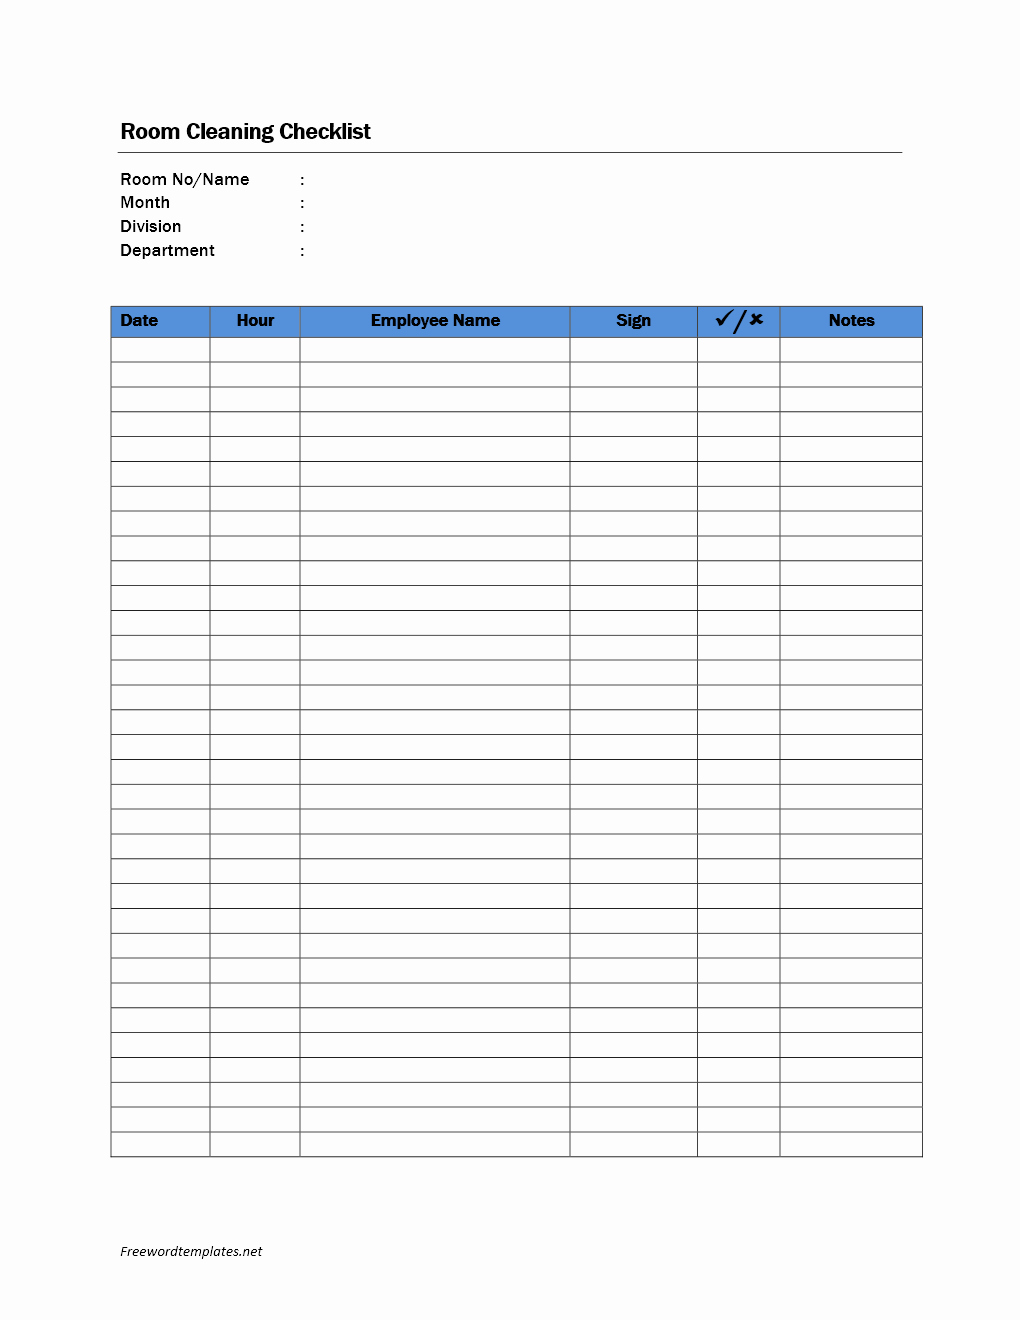 Cleaning Checklist Template Word Fresh Checklist Word Templates Free Word Templates